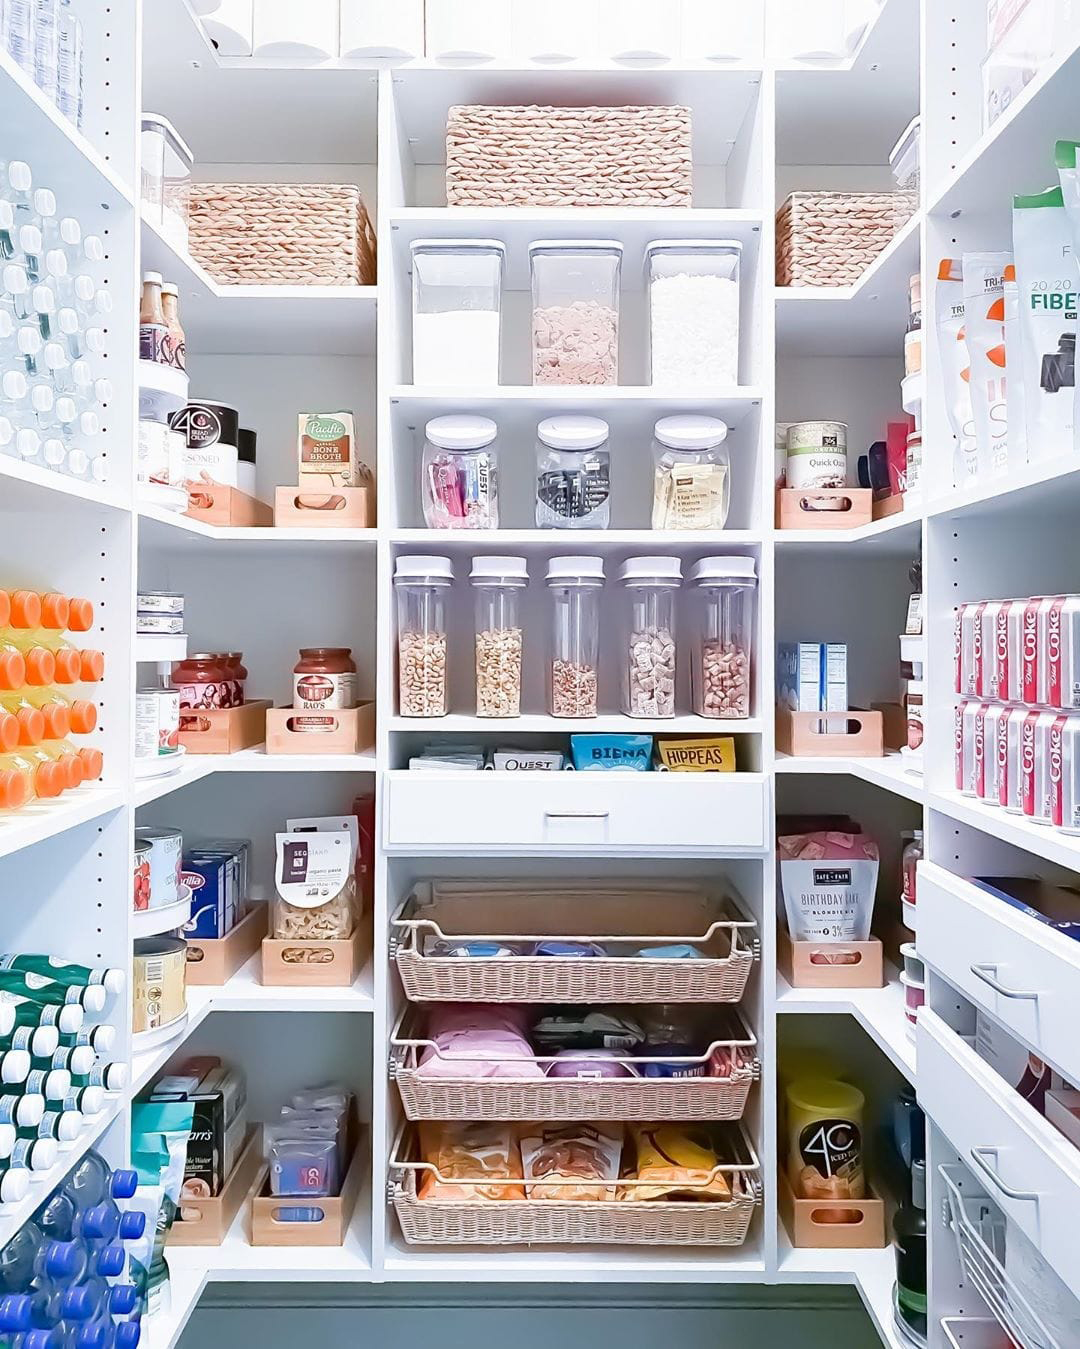 See Inside Mike ‘The Situation’ Sorrentino’s 'Neat' Pantry: Photo